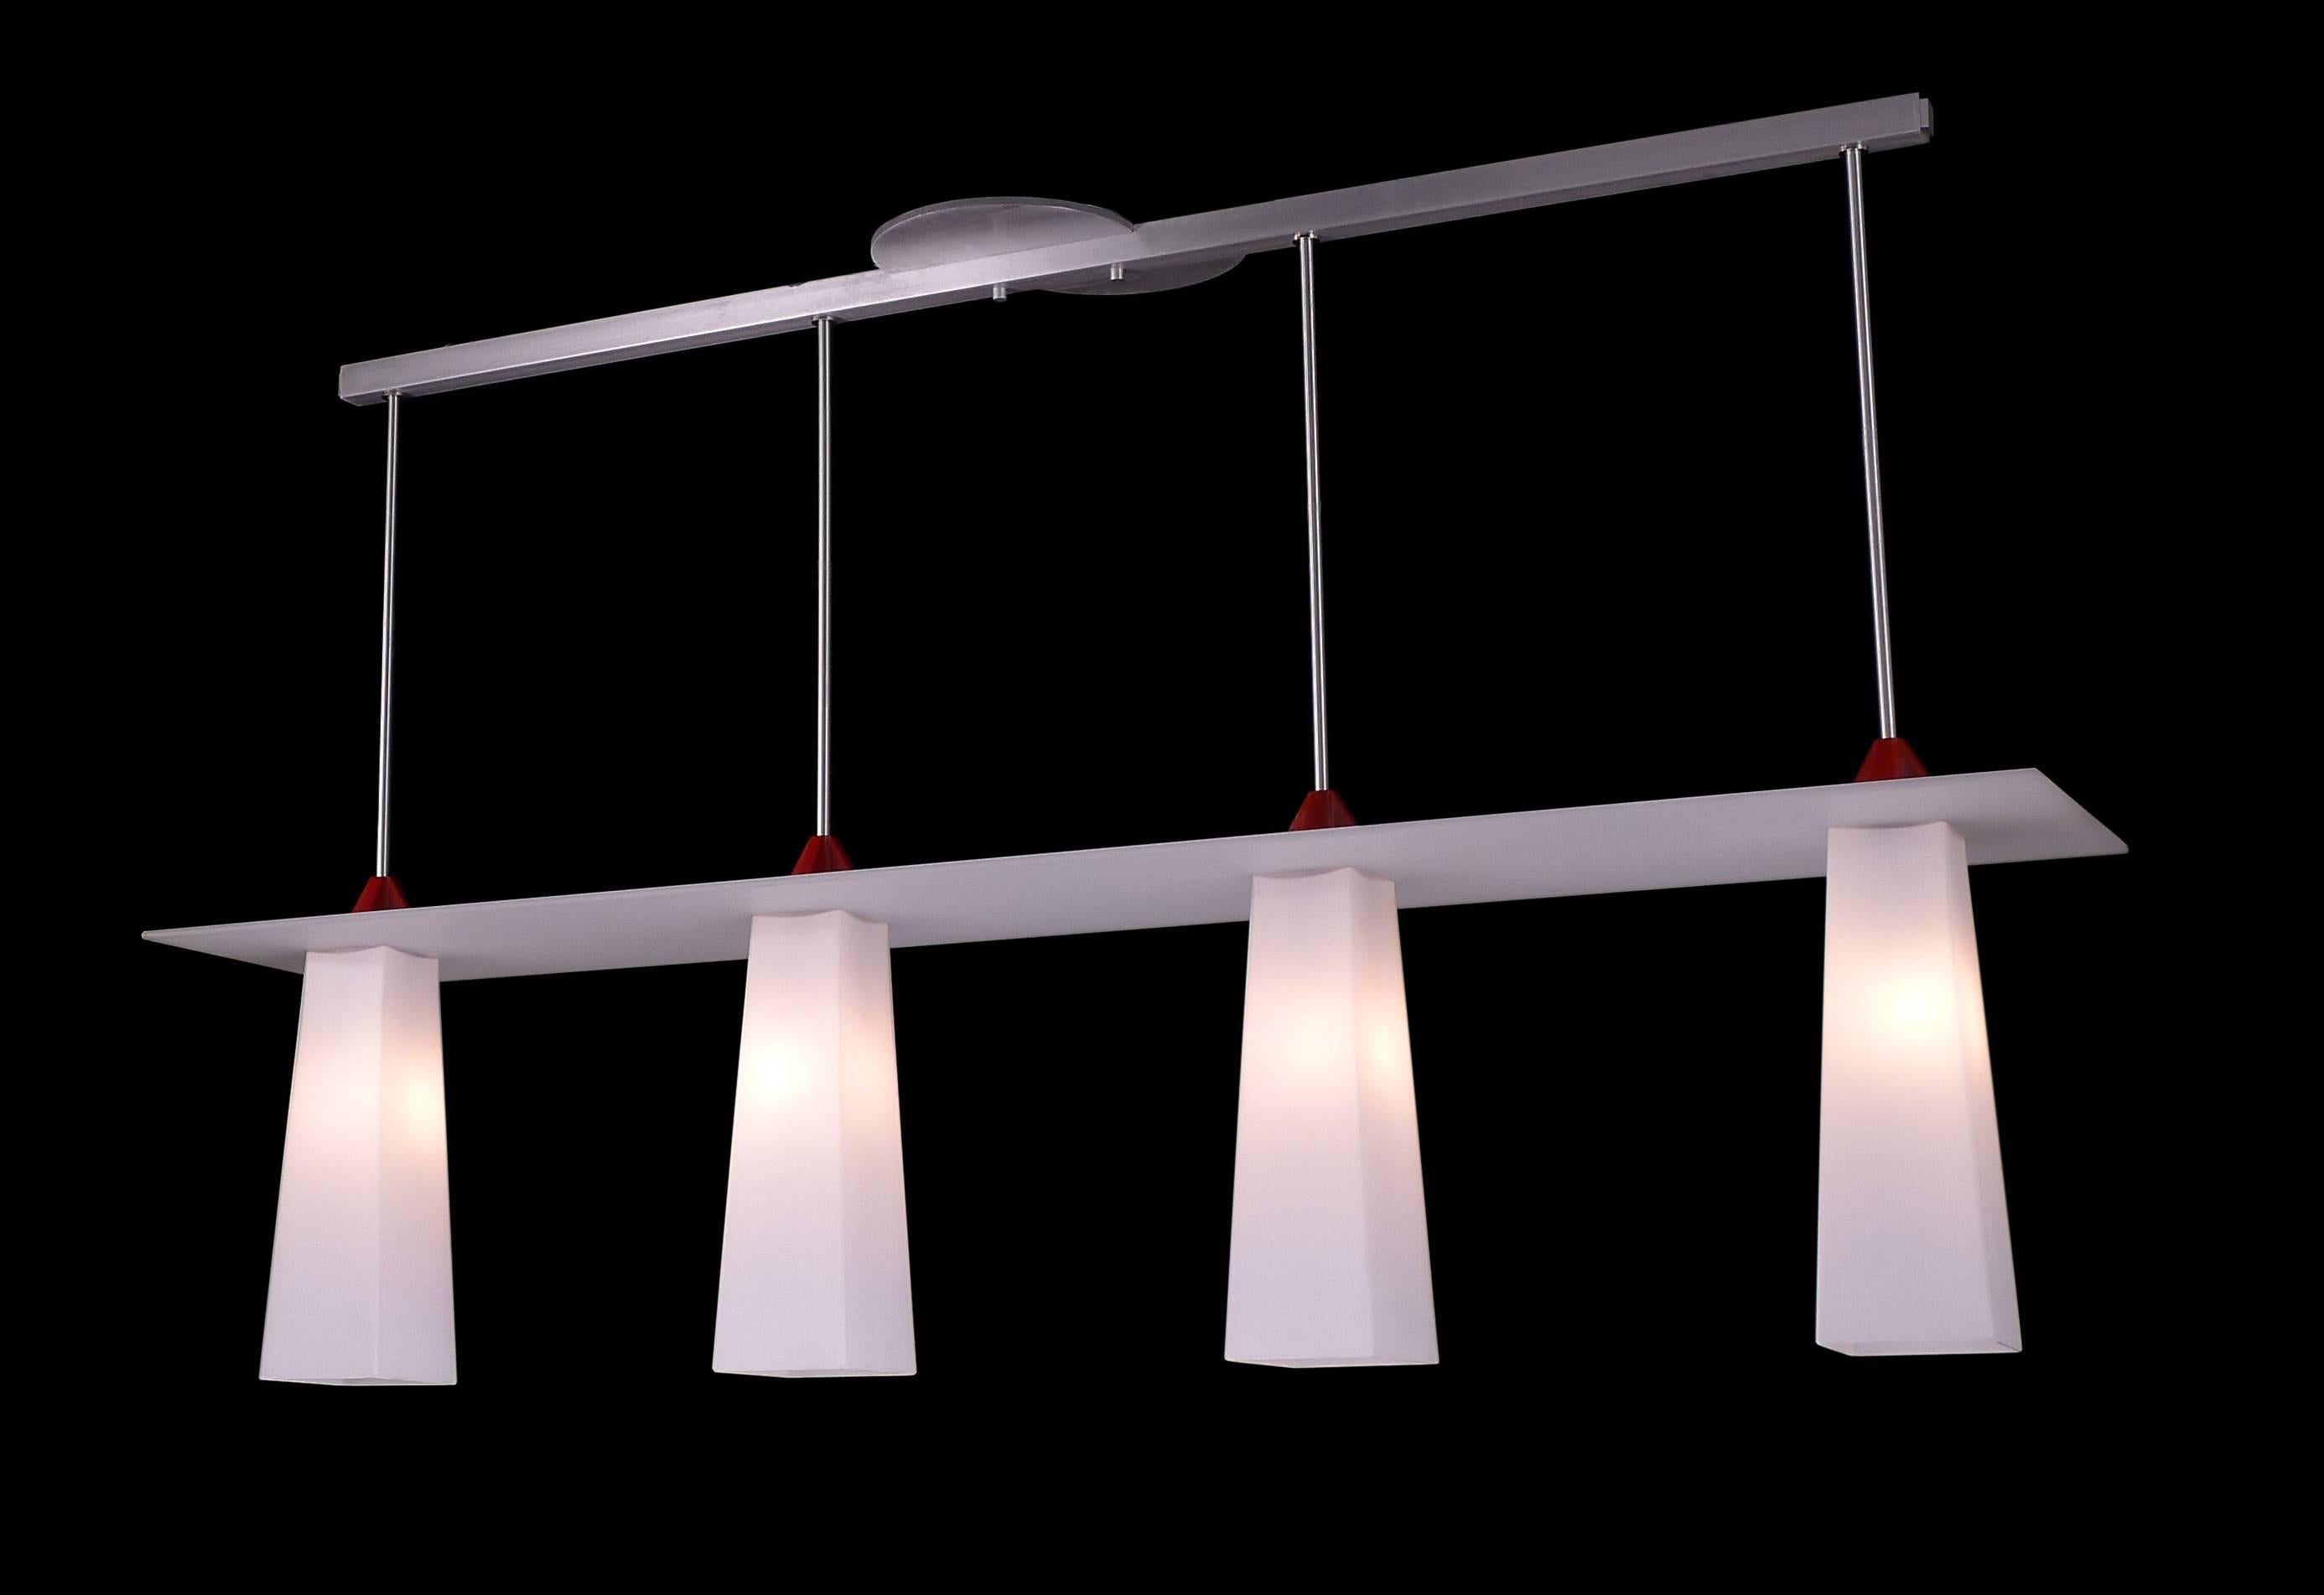 Long rectangular pendant with four white glass shades, billiard style light. In the manner of Jean Royère. With signature Duesenberg ceiling canopy. Custom heights available upon request.

Architect, Sandy Littman of Duesenberg LTD.  and The